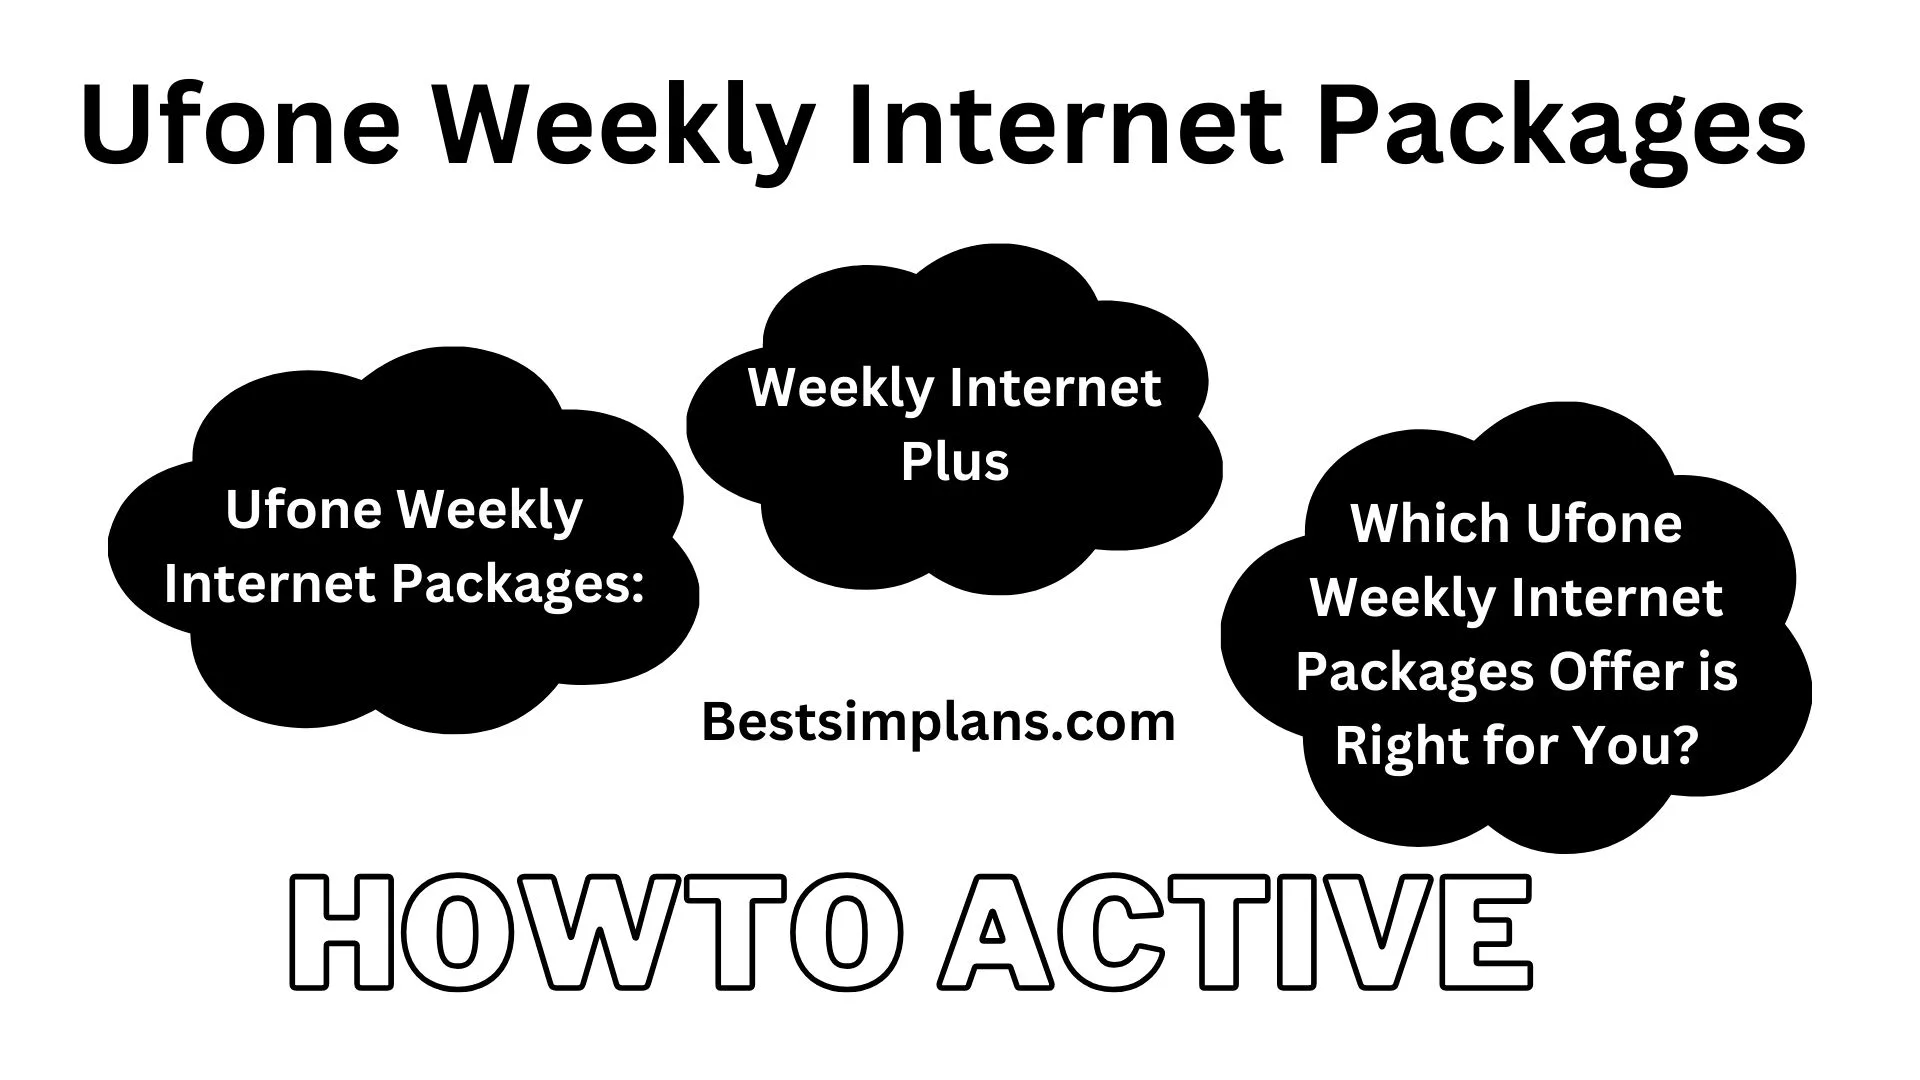 Ufone Weekly Internet Packages 40 GB